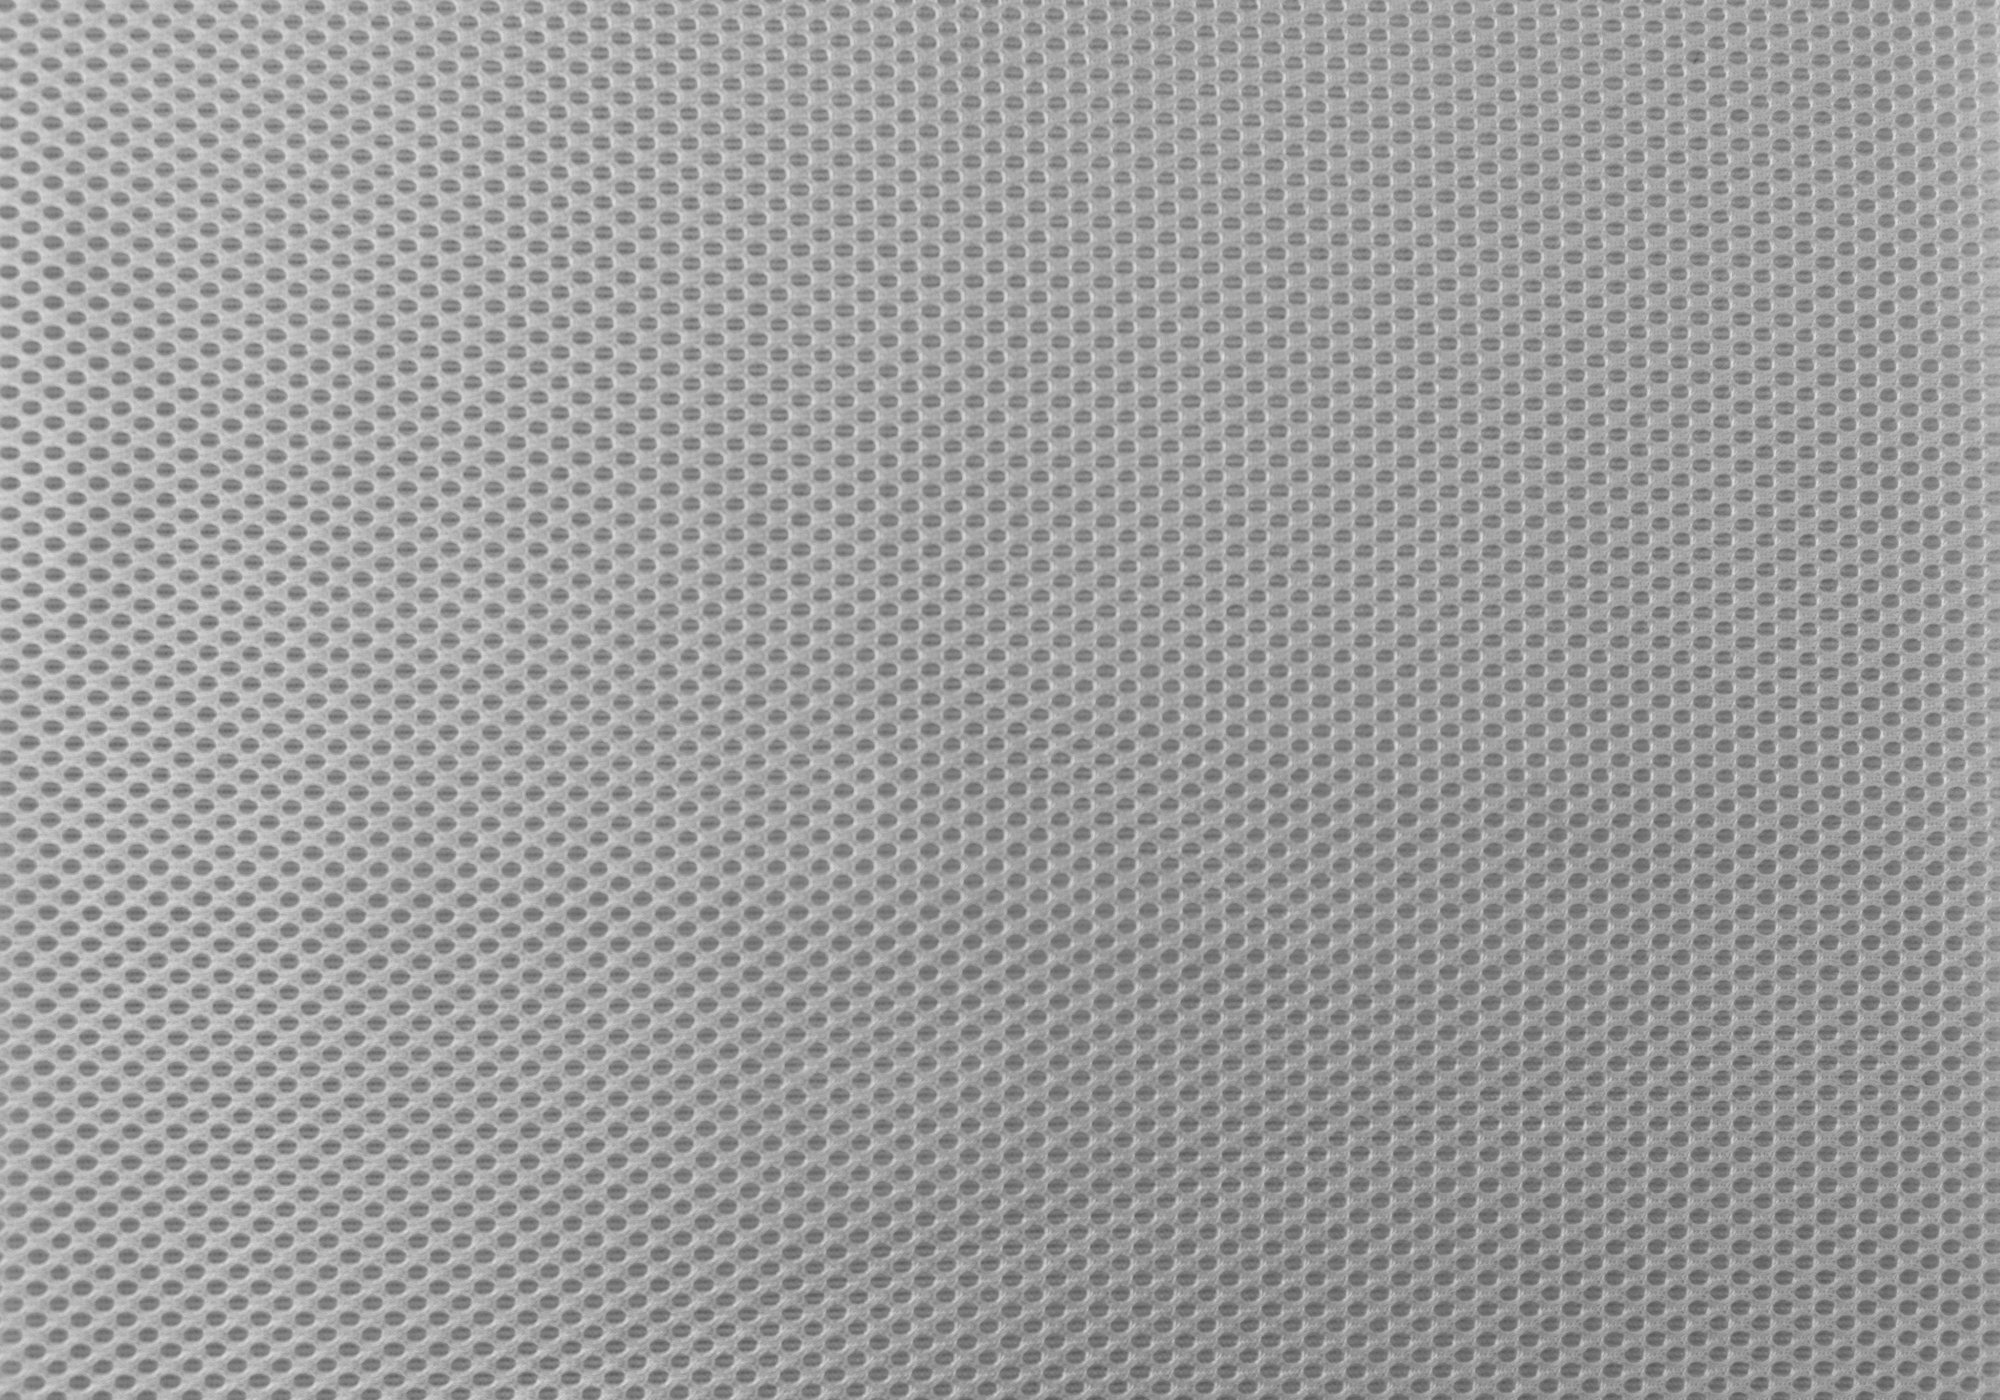 OFFICE CHAIR - WHITE / GREY MESH / MULTI POSITION